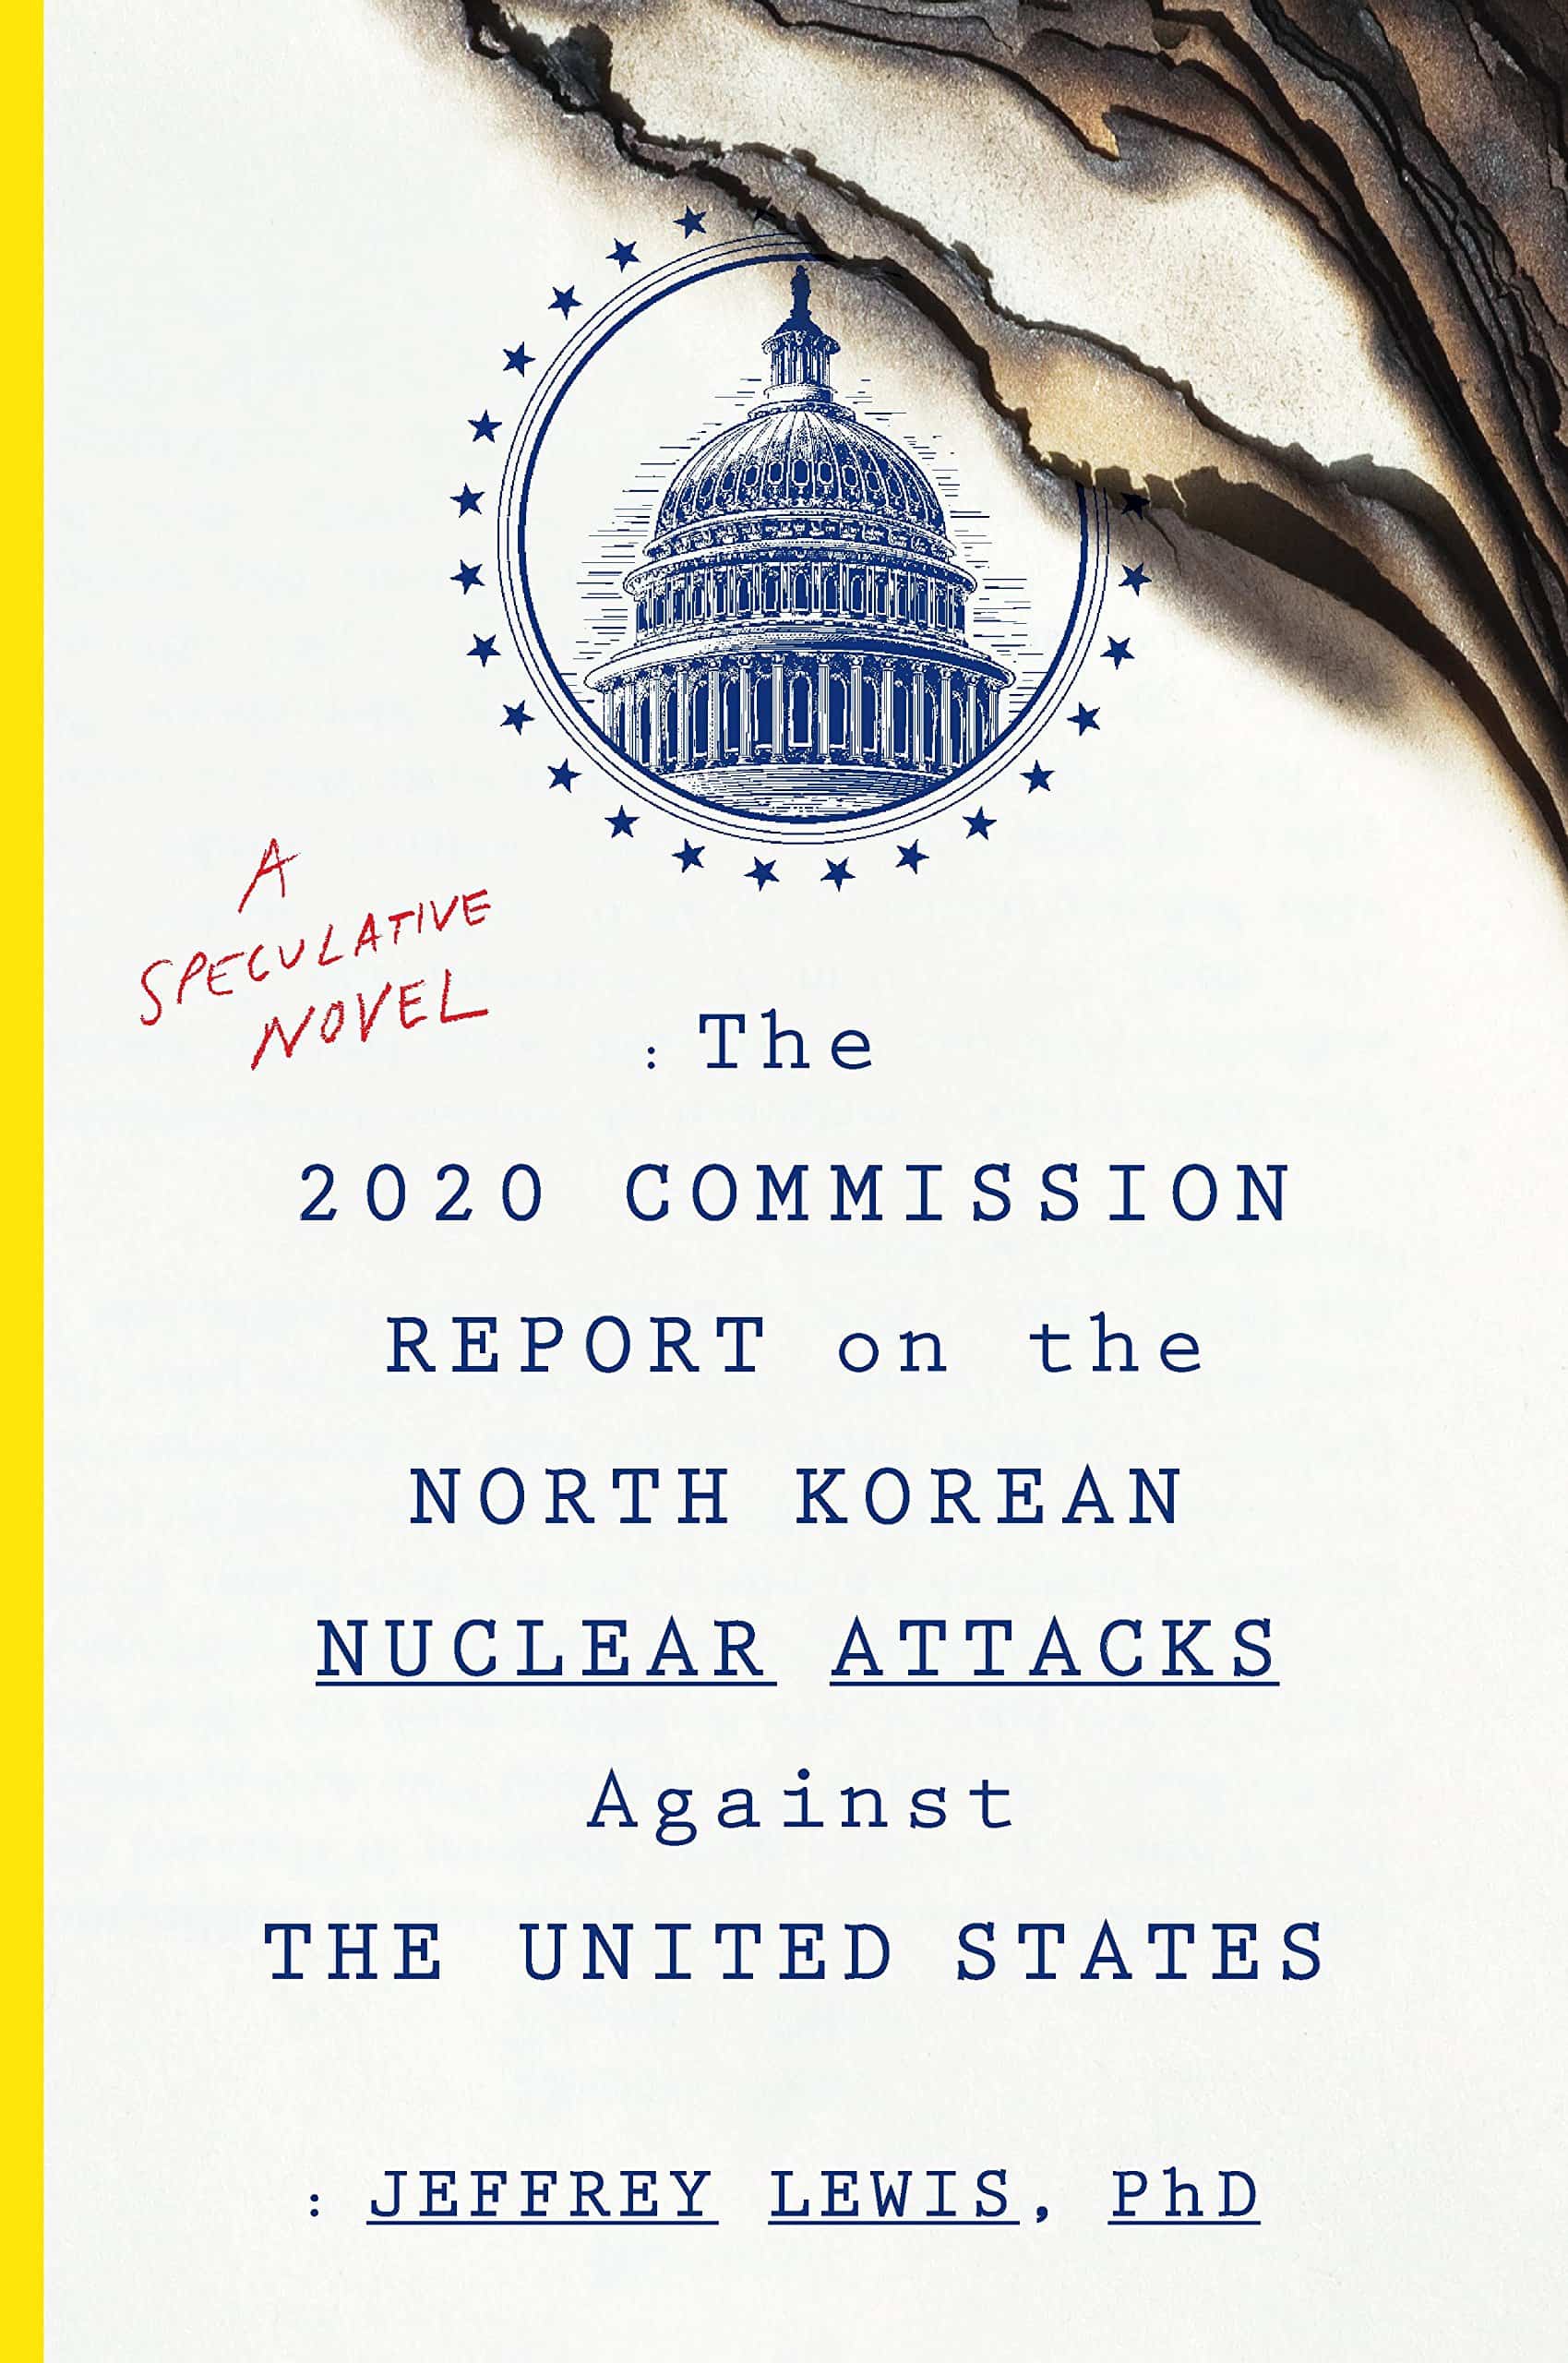 The cover of The 2020 Commission Report on the North Korean Nuclear Attacks Against the United States